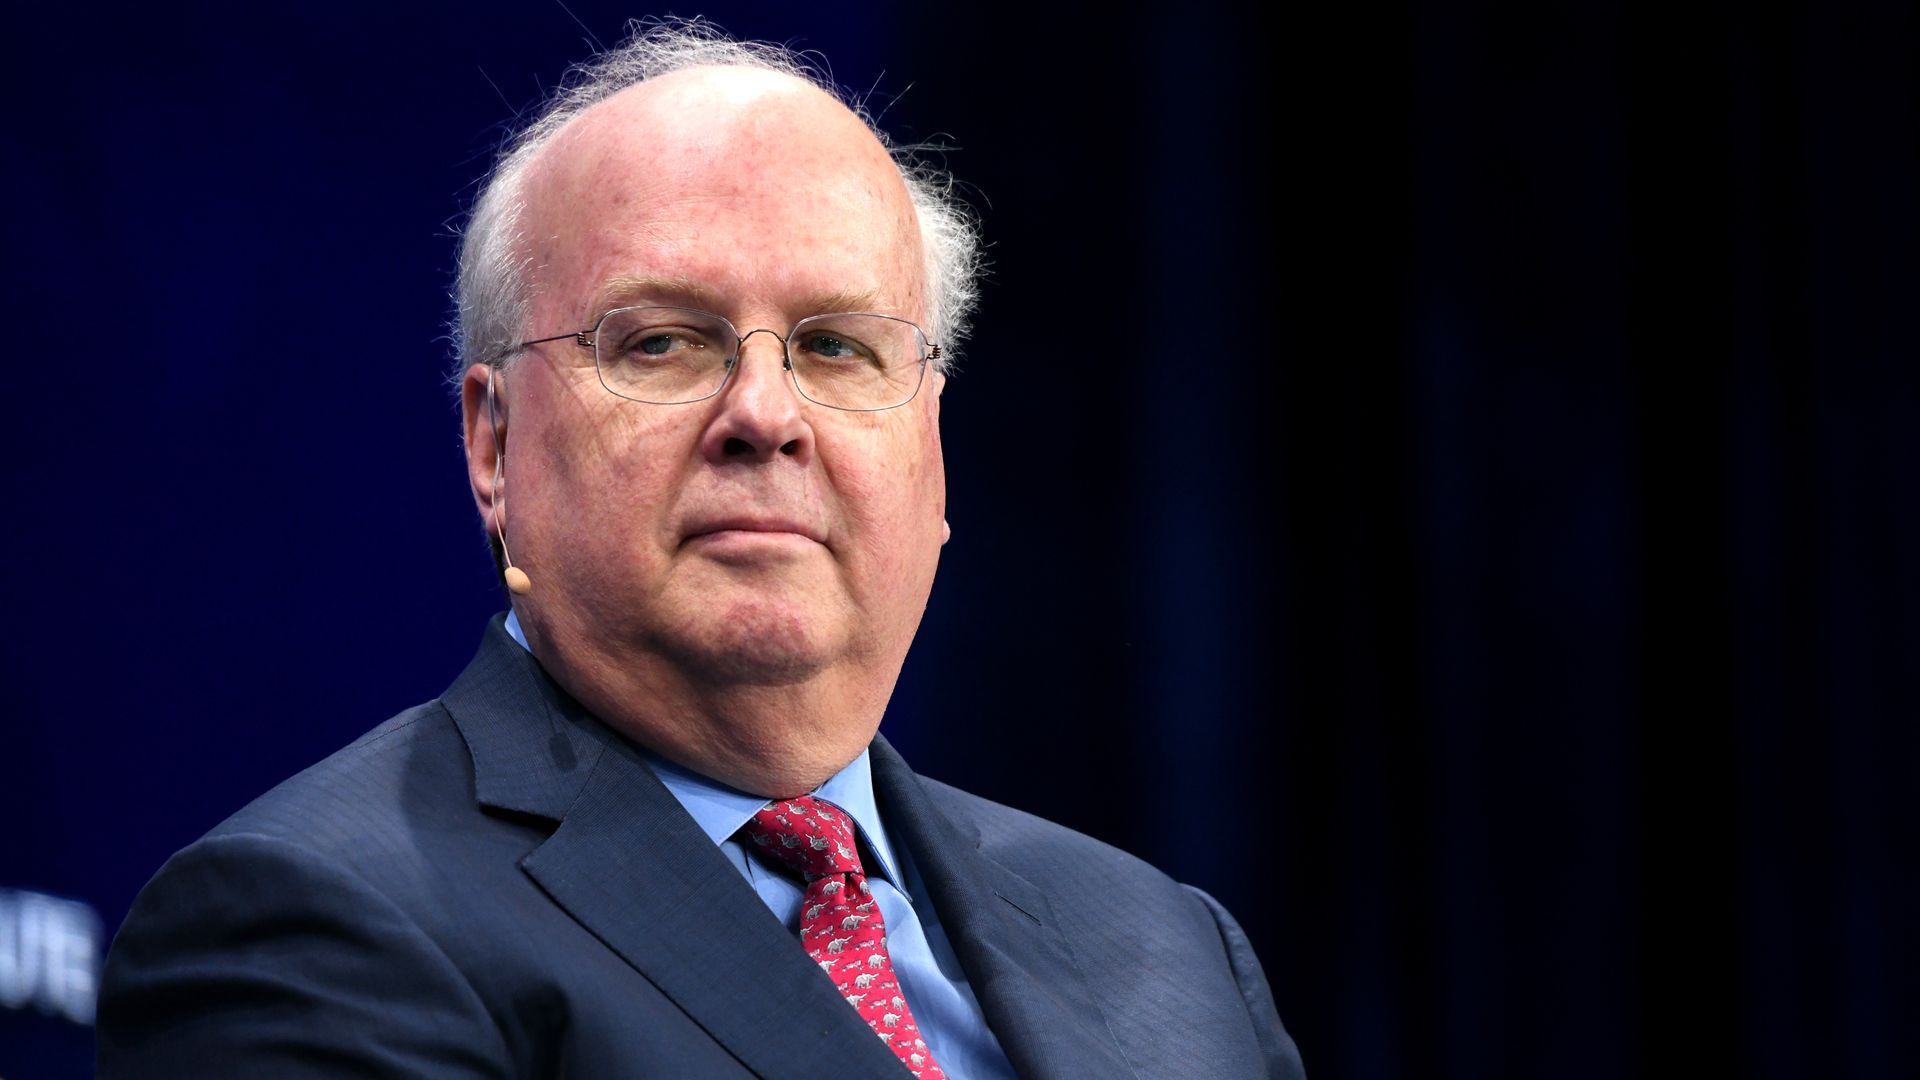 Karl Rove participates in a panel discussion during the annual Milken Institute Global Conference at The Beverly Hilton Hotel on April 29, 2019 in Beverly Hills